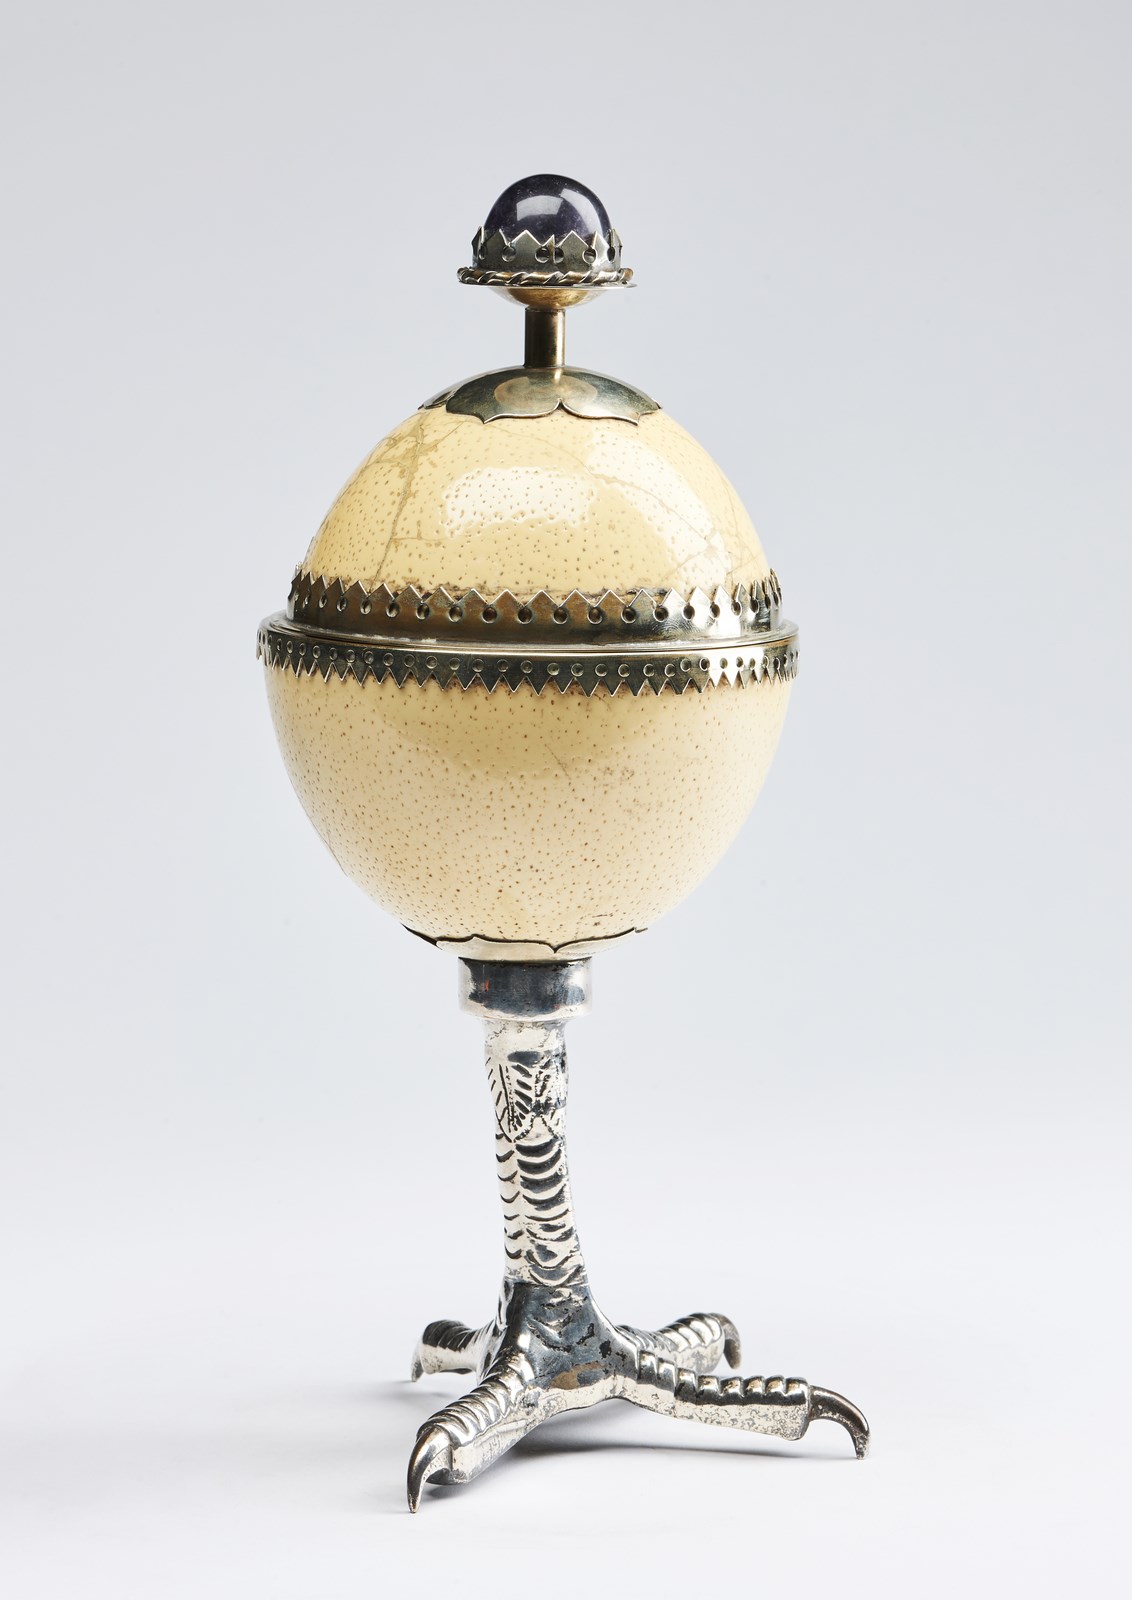 Naturalia Anthony Redmile, mounted ostrich egg England, 20th century . - Image 2 of 4